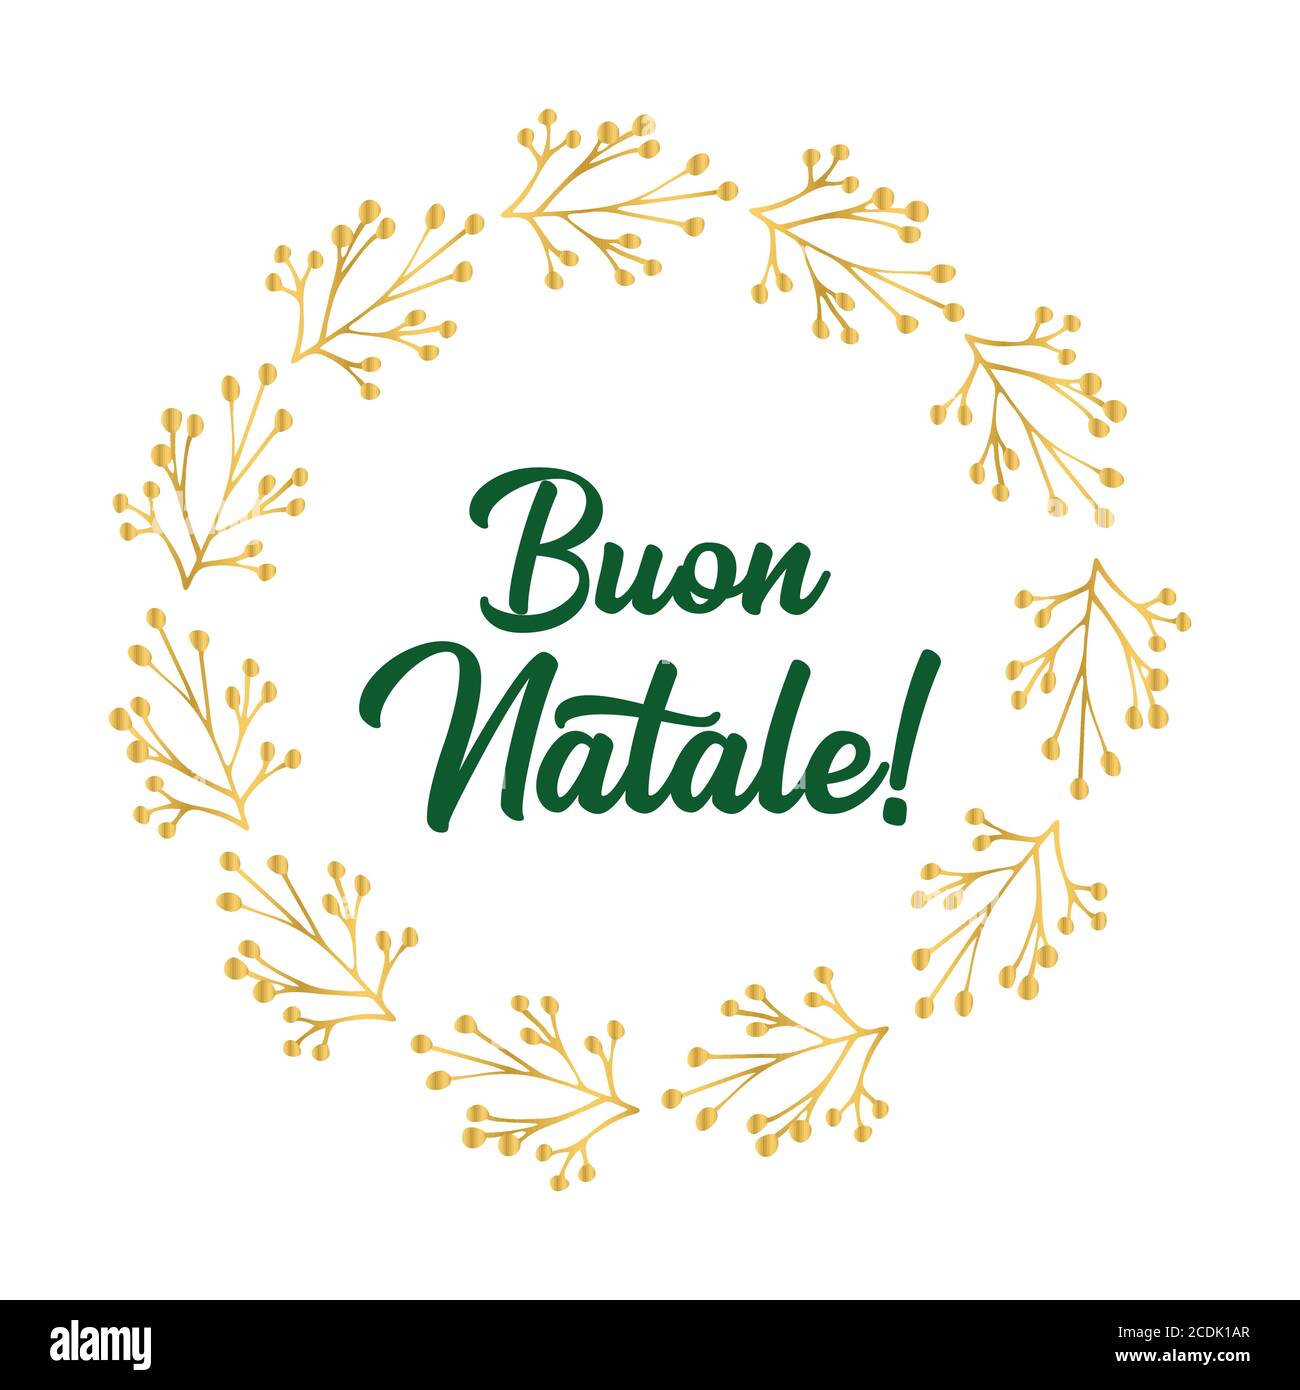 Buon Natale Logo.Buon Natale Quote In Italian With Wreath As Logo Or Header Translated Merry Christmas Celebration Lettering For Poster Card Invitation Stock Vector Image Art Alamy